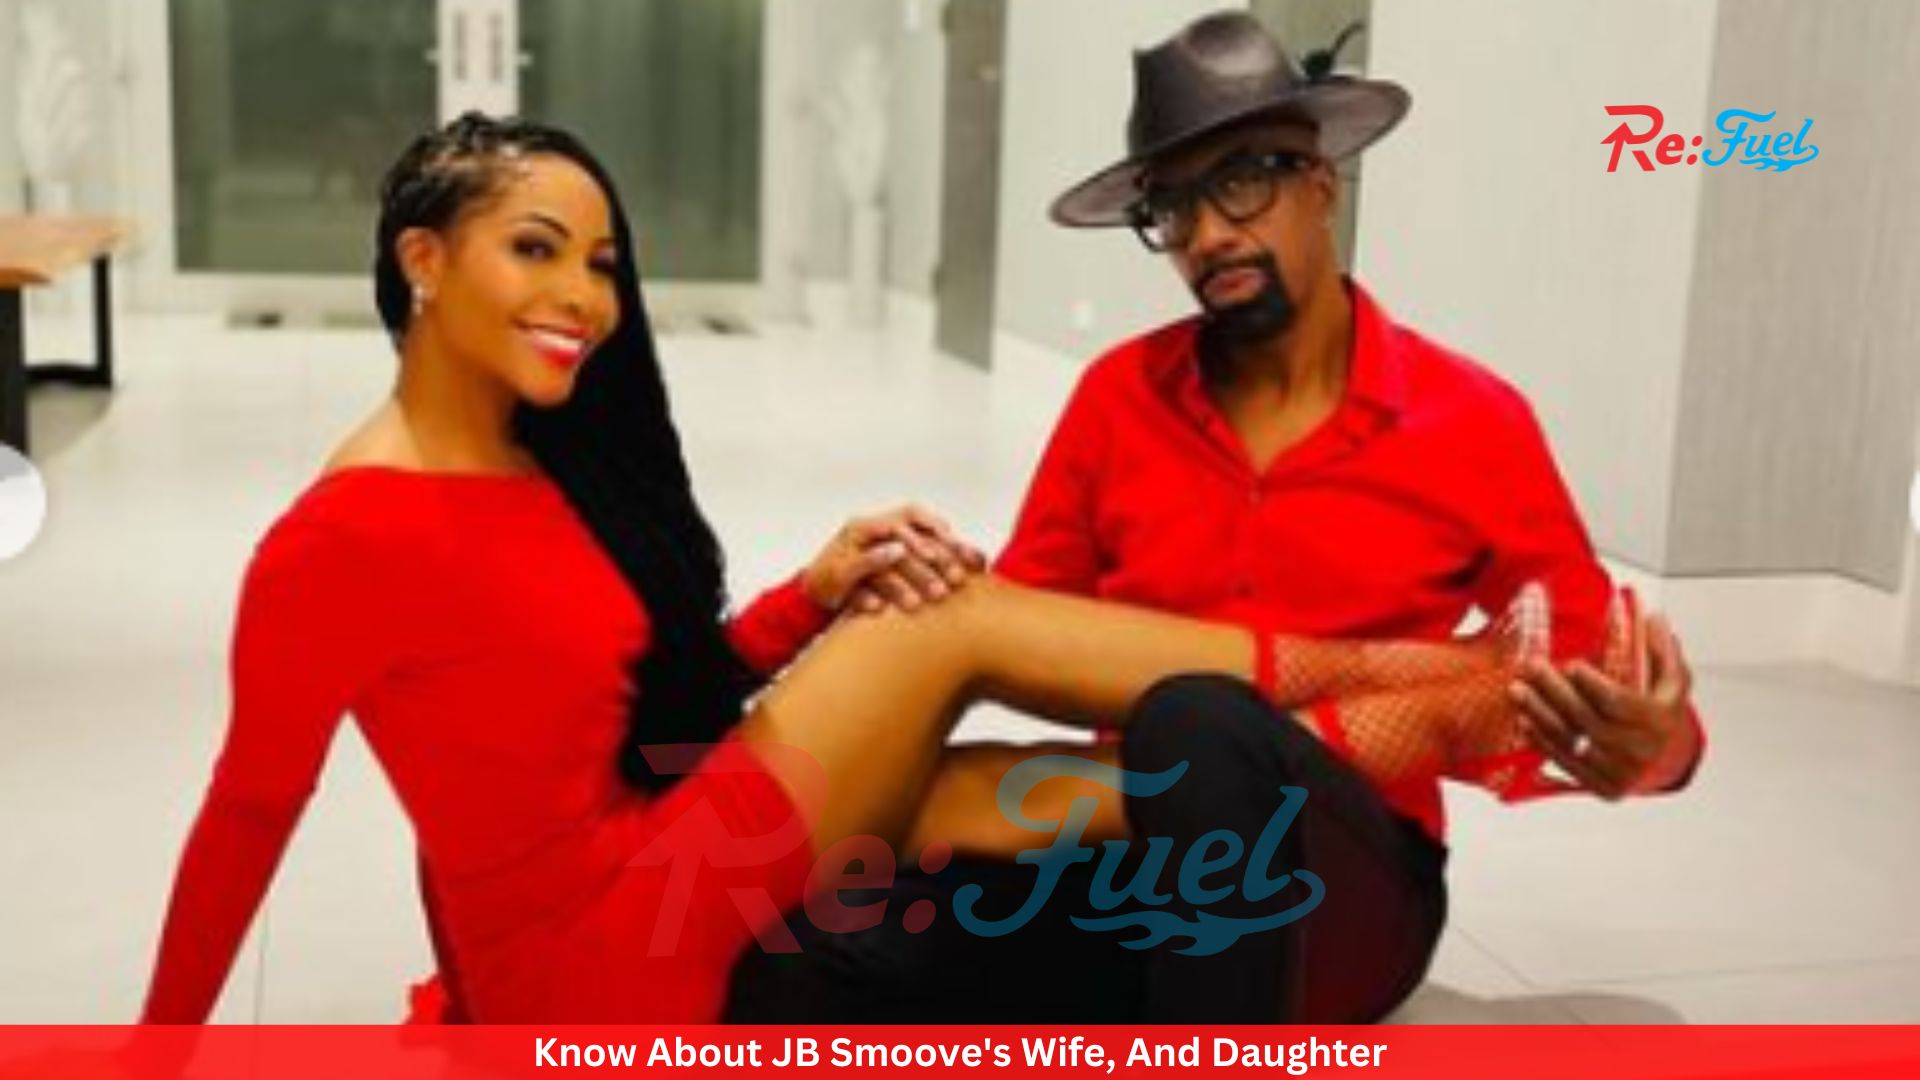 Know About JB Smoove's Wife, And Daughter